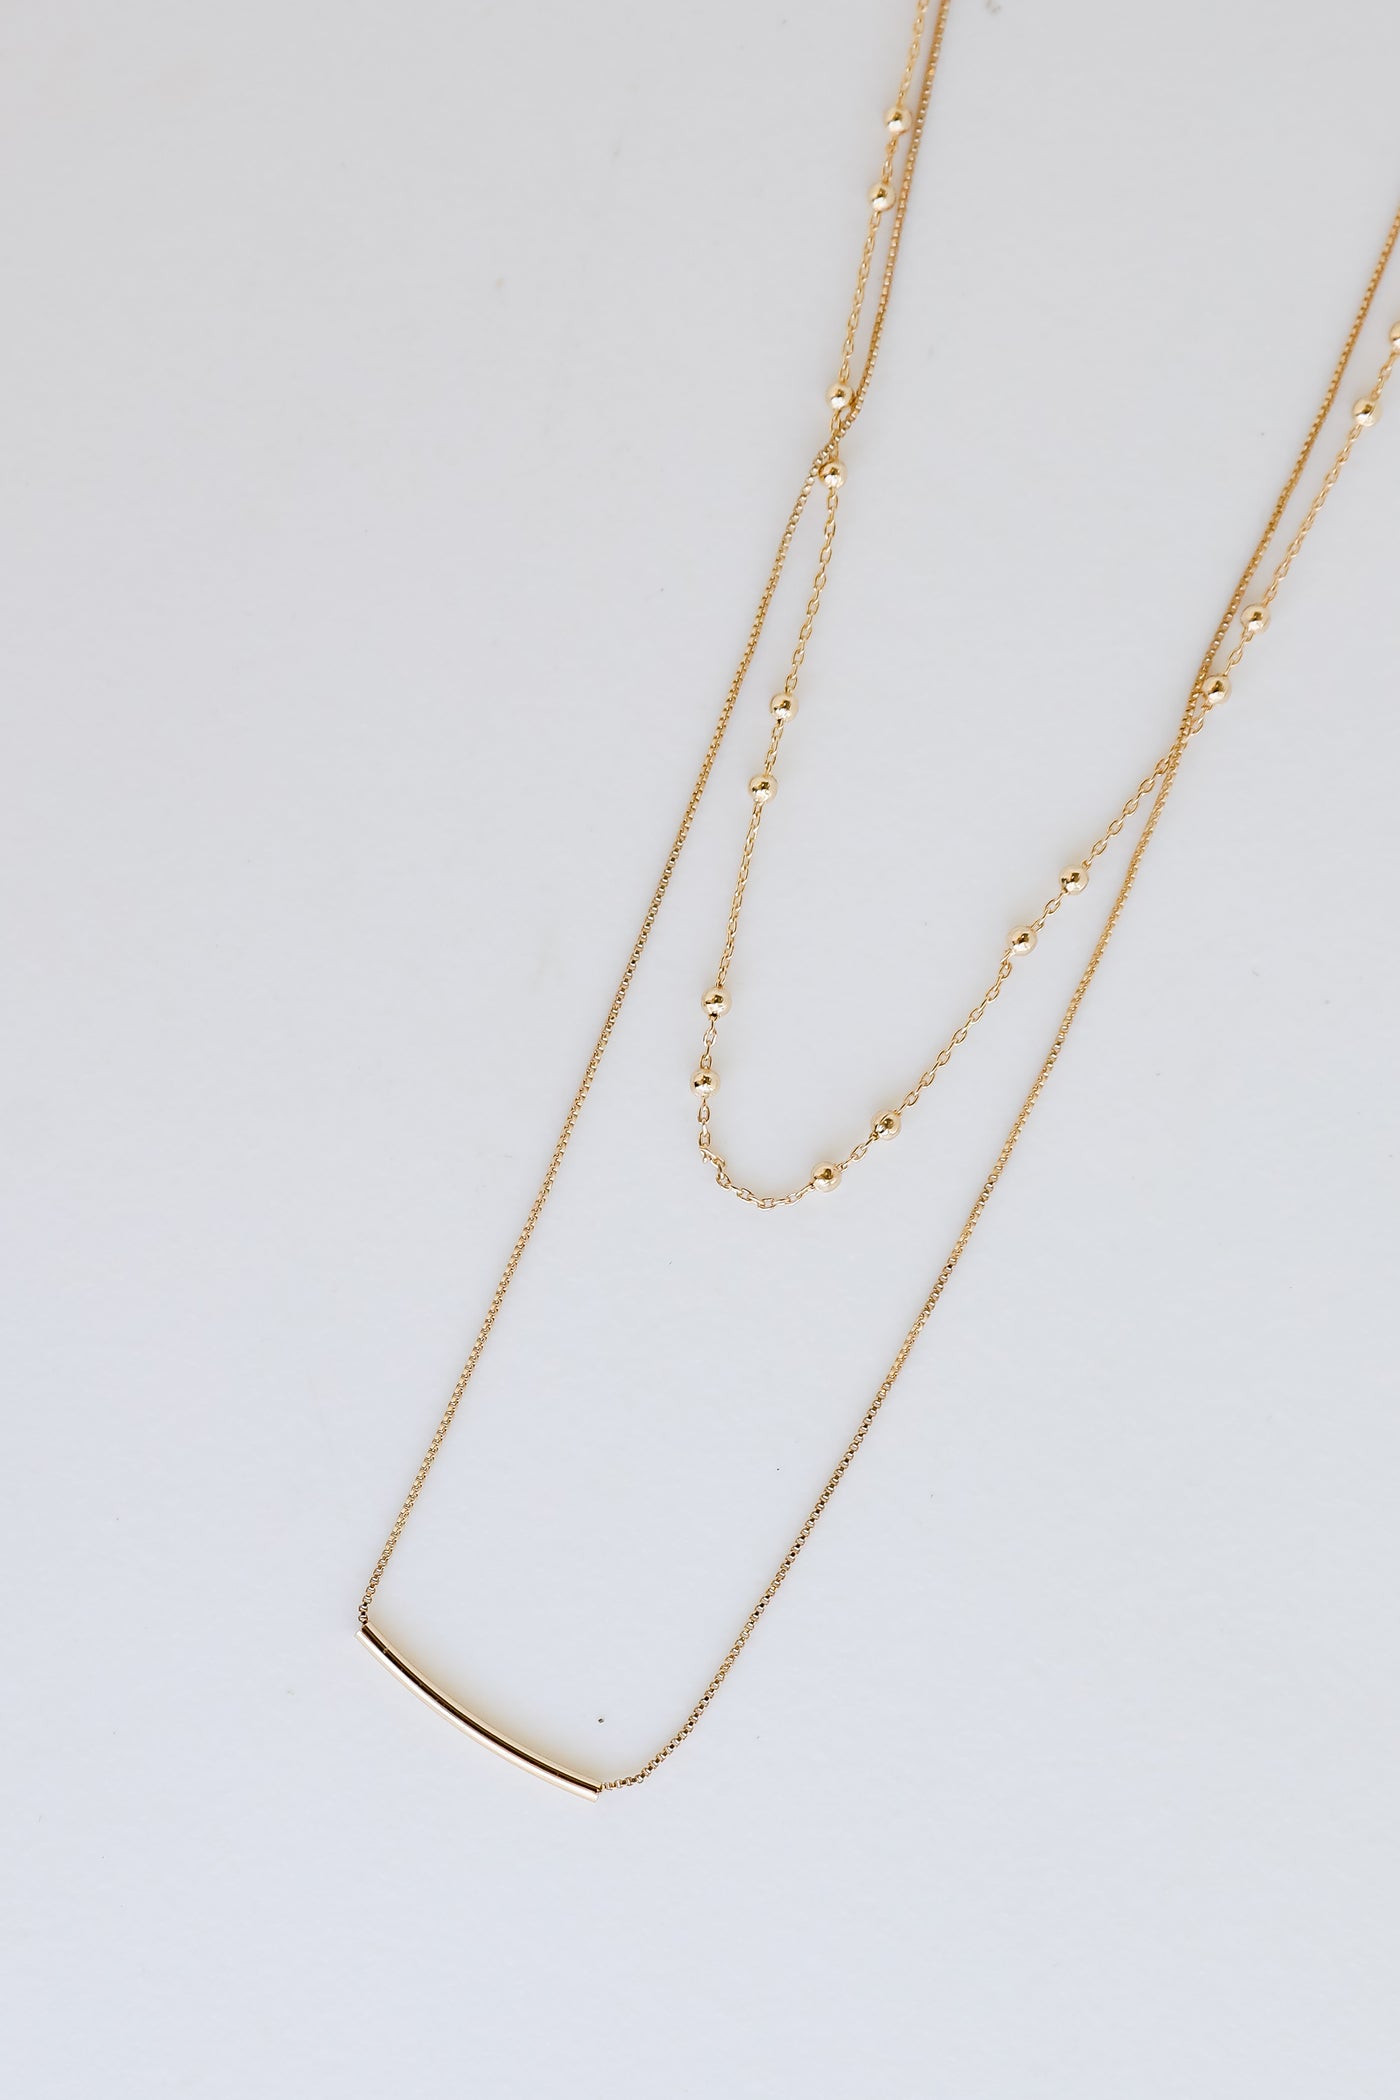 Gold Layered Chain Necklace close up